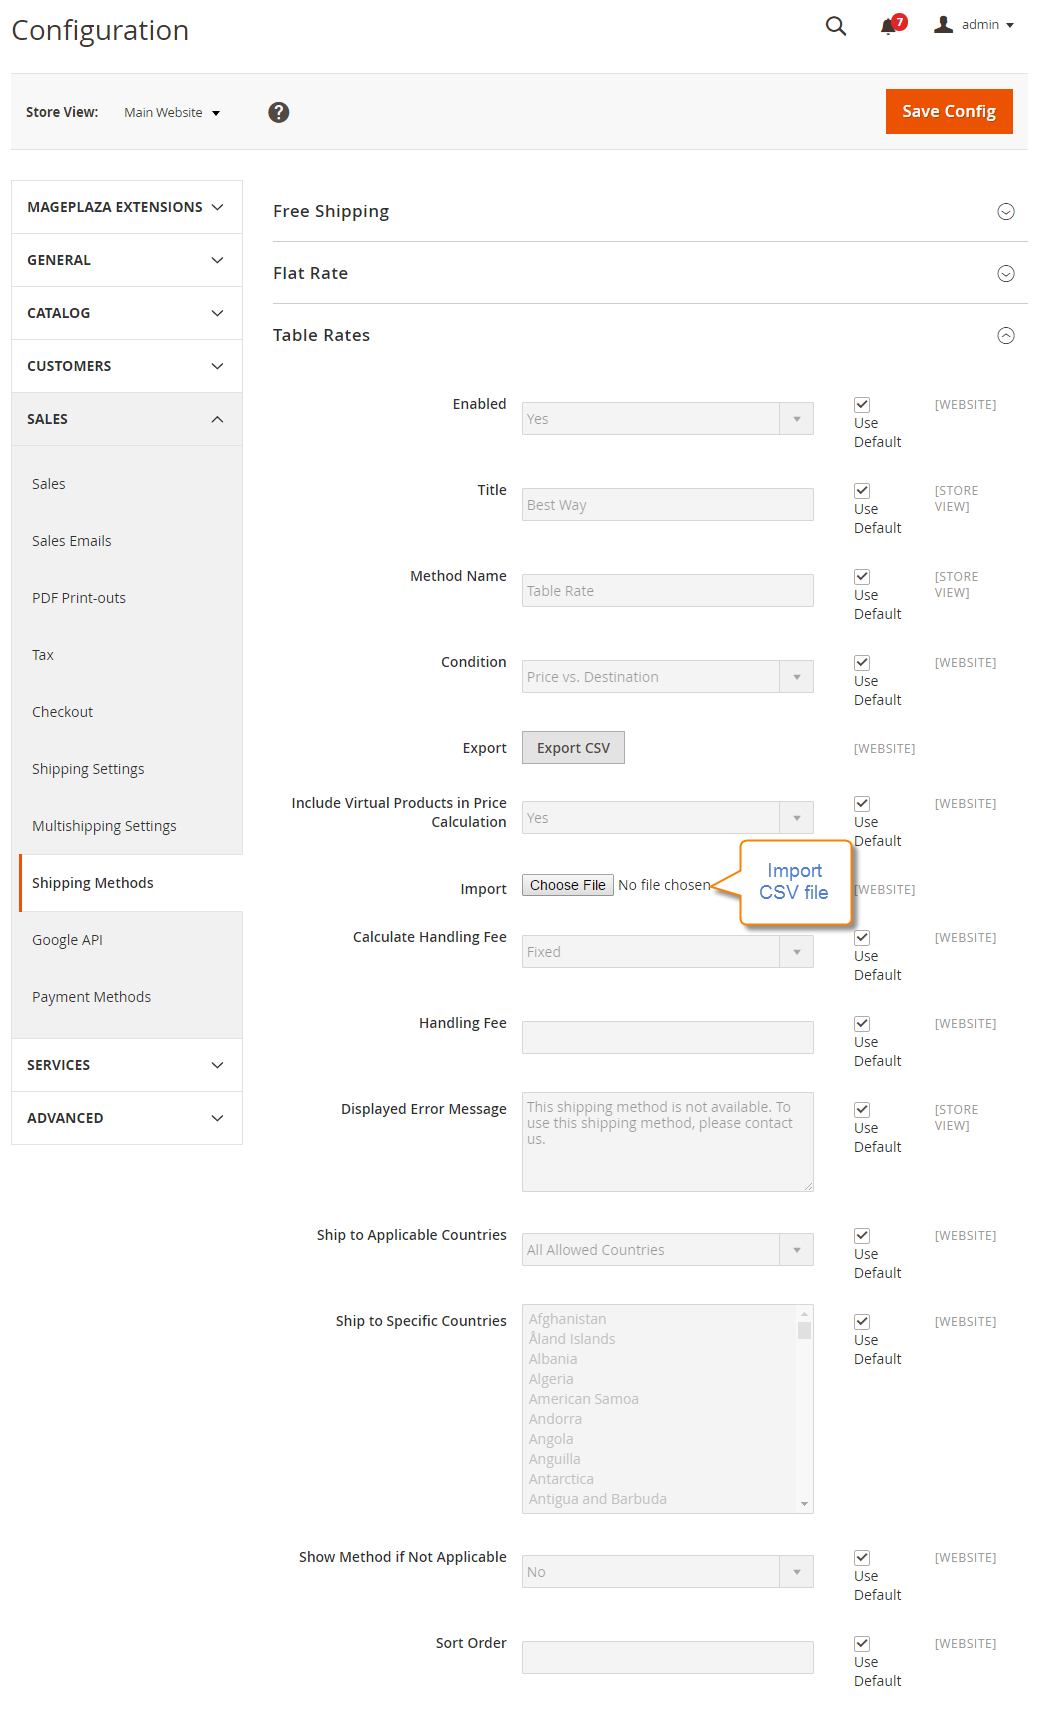 How to Configure Table Rates Shipping Method Import CSV file